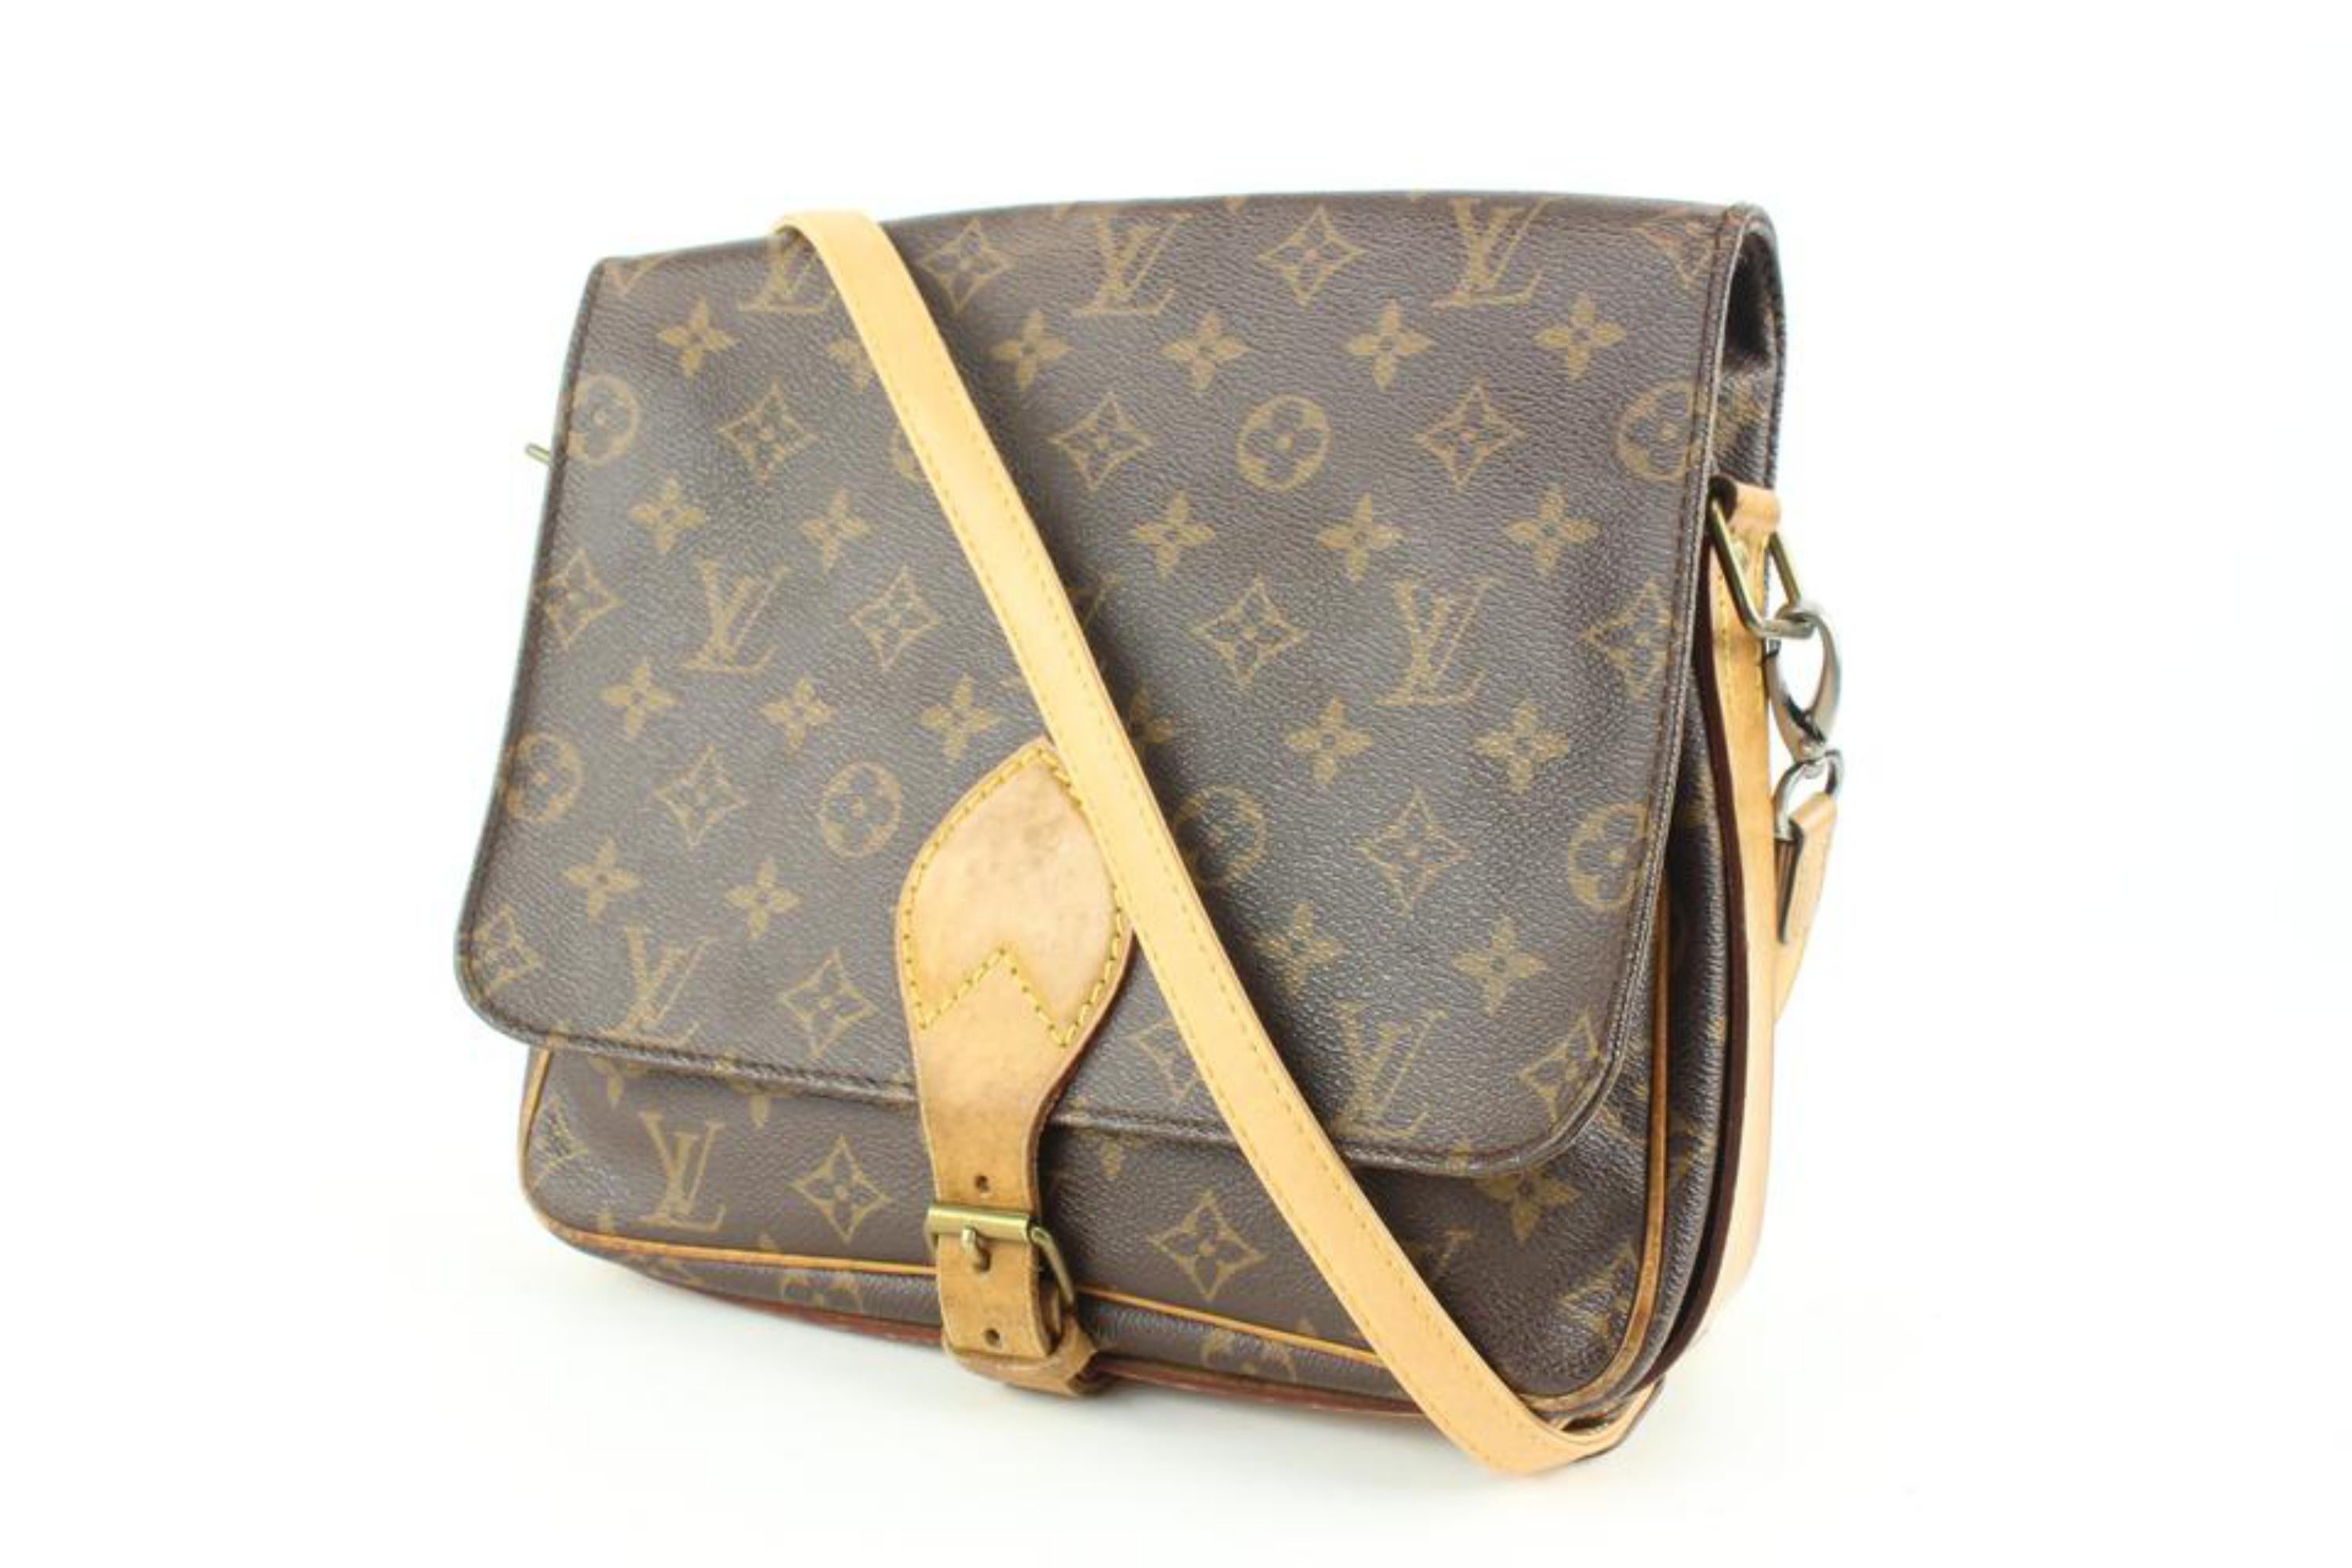 Louis Vuitton Monogram Cartouchiere GM Crossbod Bag 113lv42
Date Code/Serial Number: 8912 SL
Made In: France
Measurements: Length:  9.5